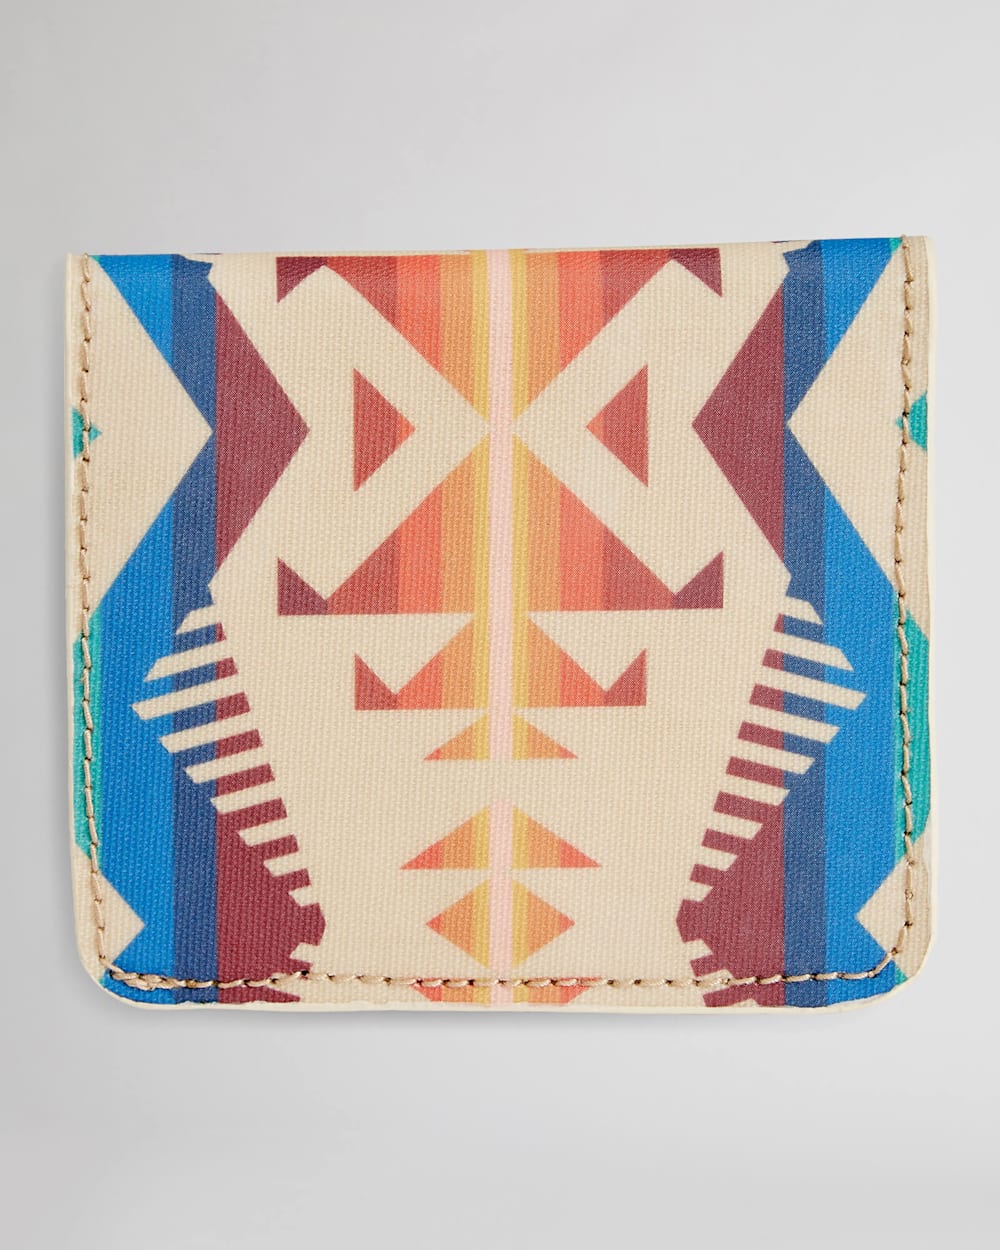 ALTERNATE VIEW OF LOS LUNAS CANOPY CANVAS SNAP WALLET IN TAN MULTI image number 2